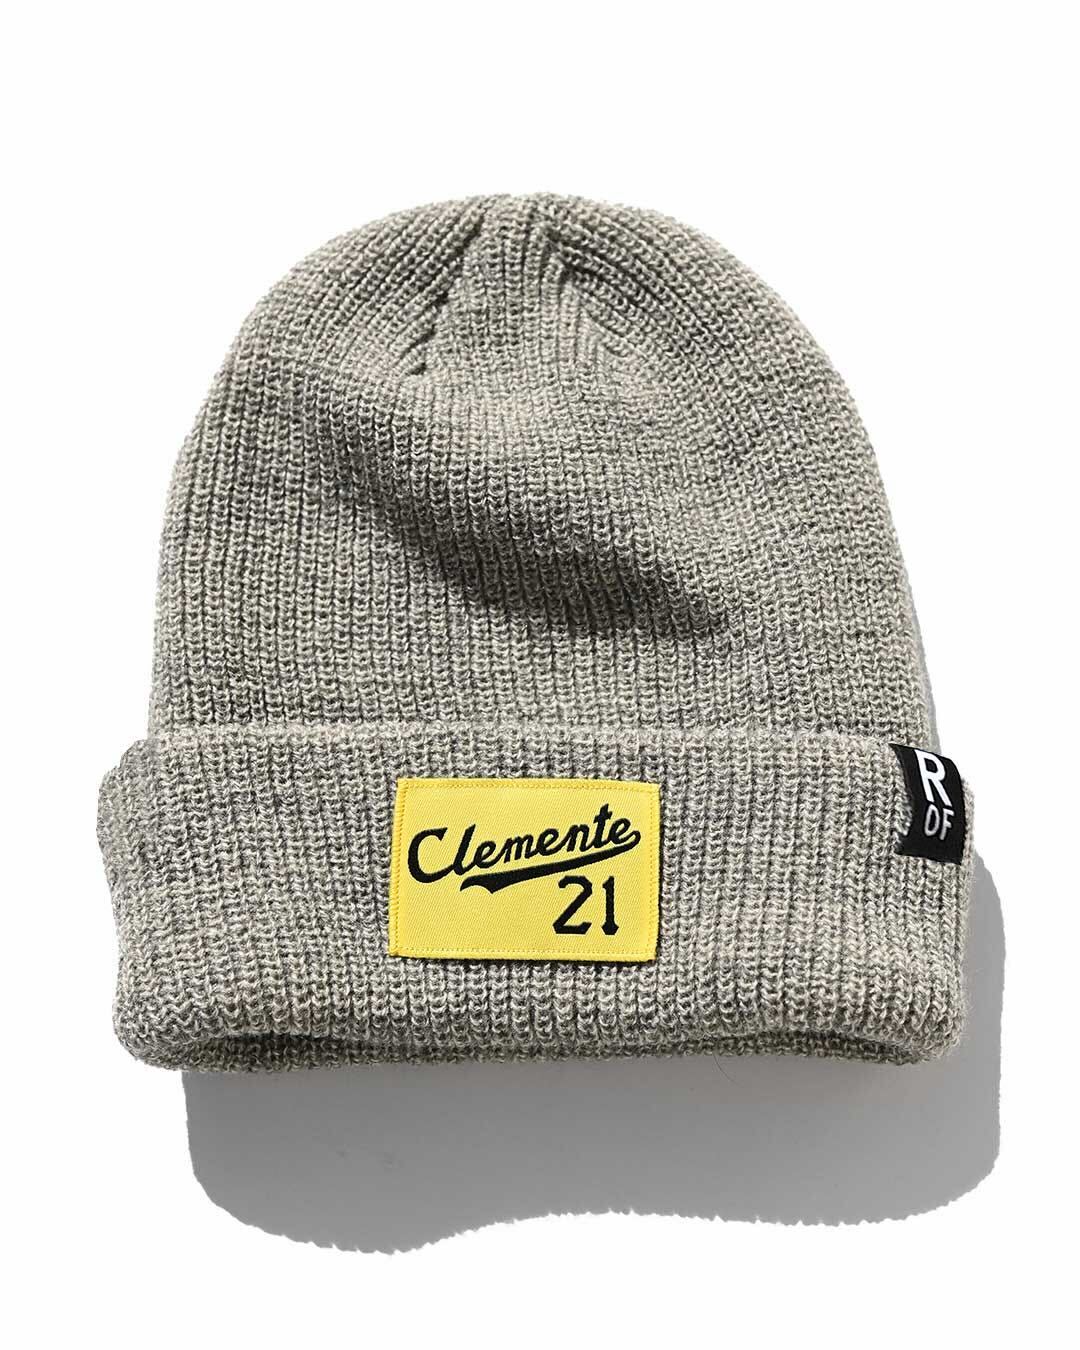 Clemente #21 Heather Tan Beanie - Roots of Fight Canada